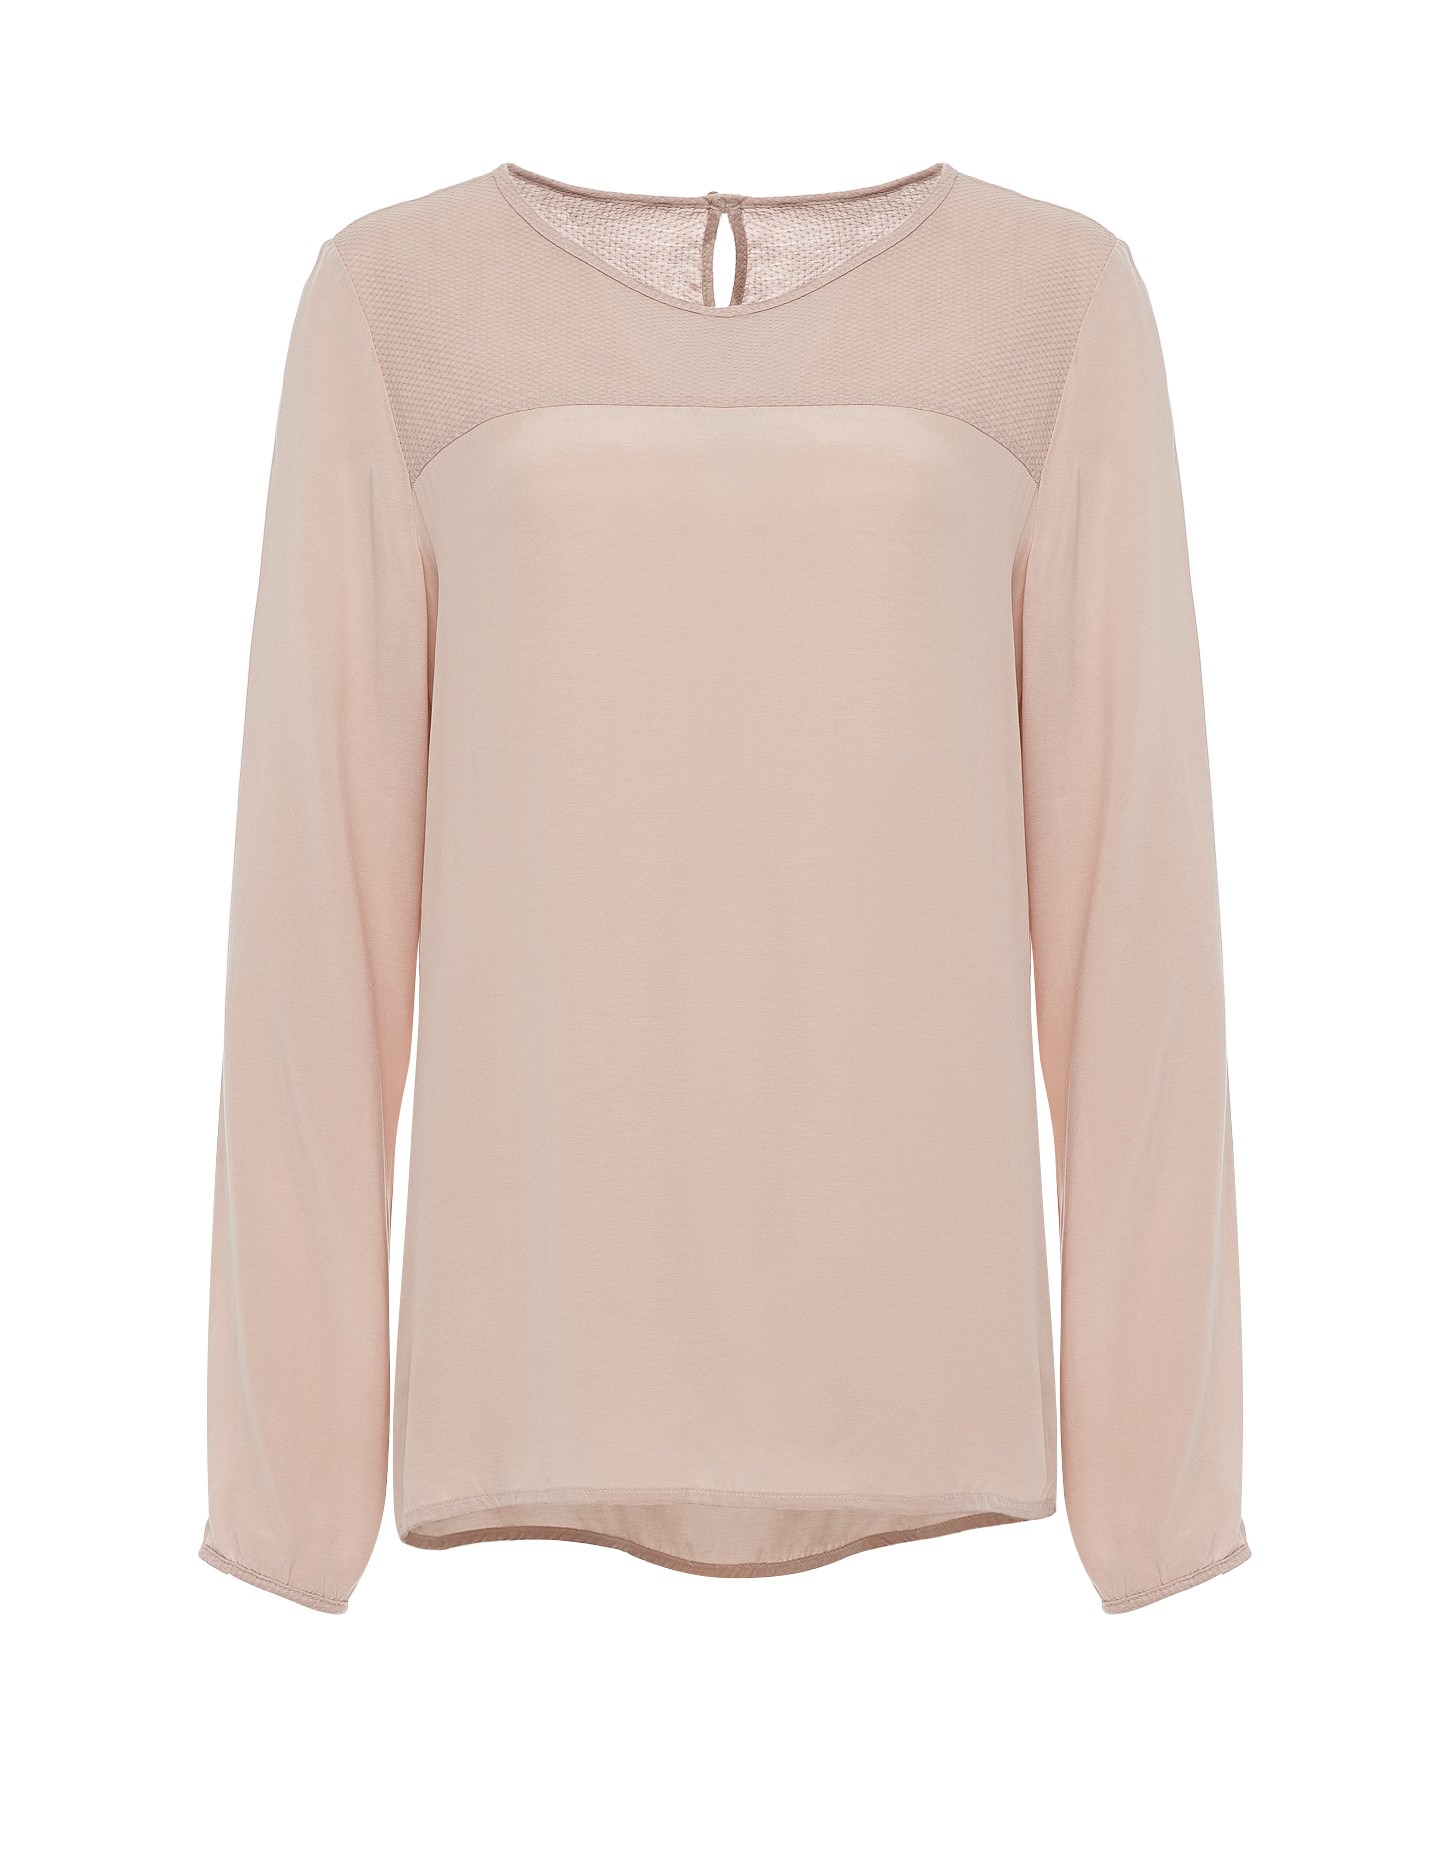 Shirt blouse Falini SP pink by OPUS | shop your favourites online